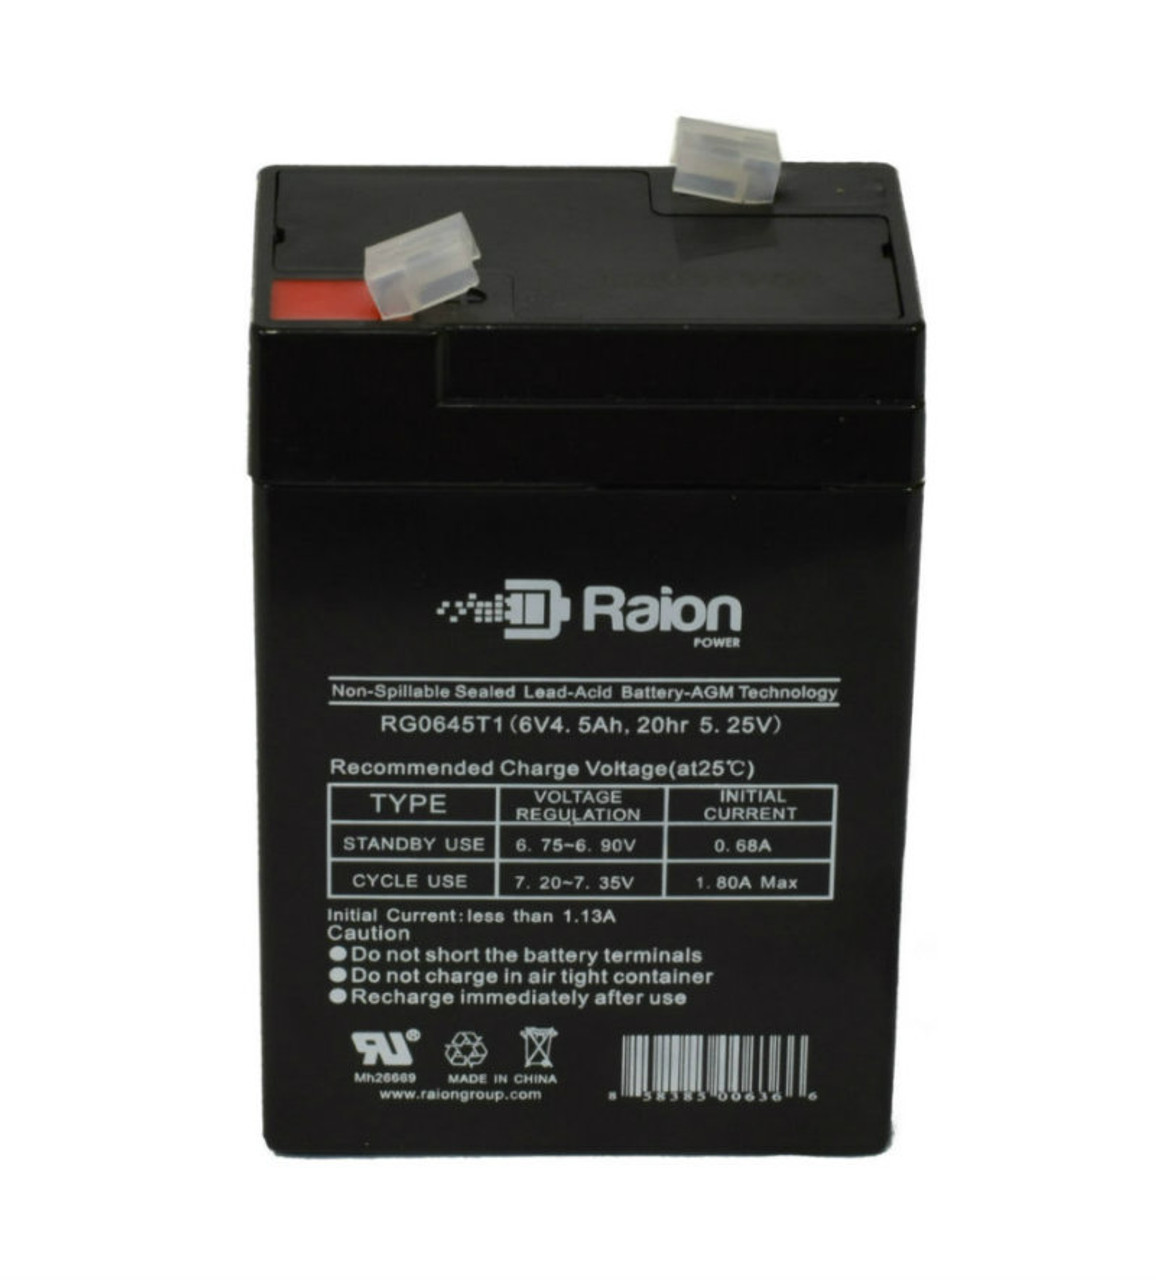 Raion Power RG0645T1 Replacement Battery Cartridge for Sonnenschein LCR6V4P